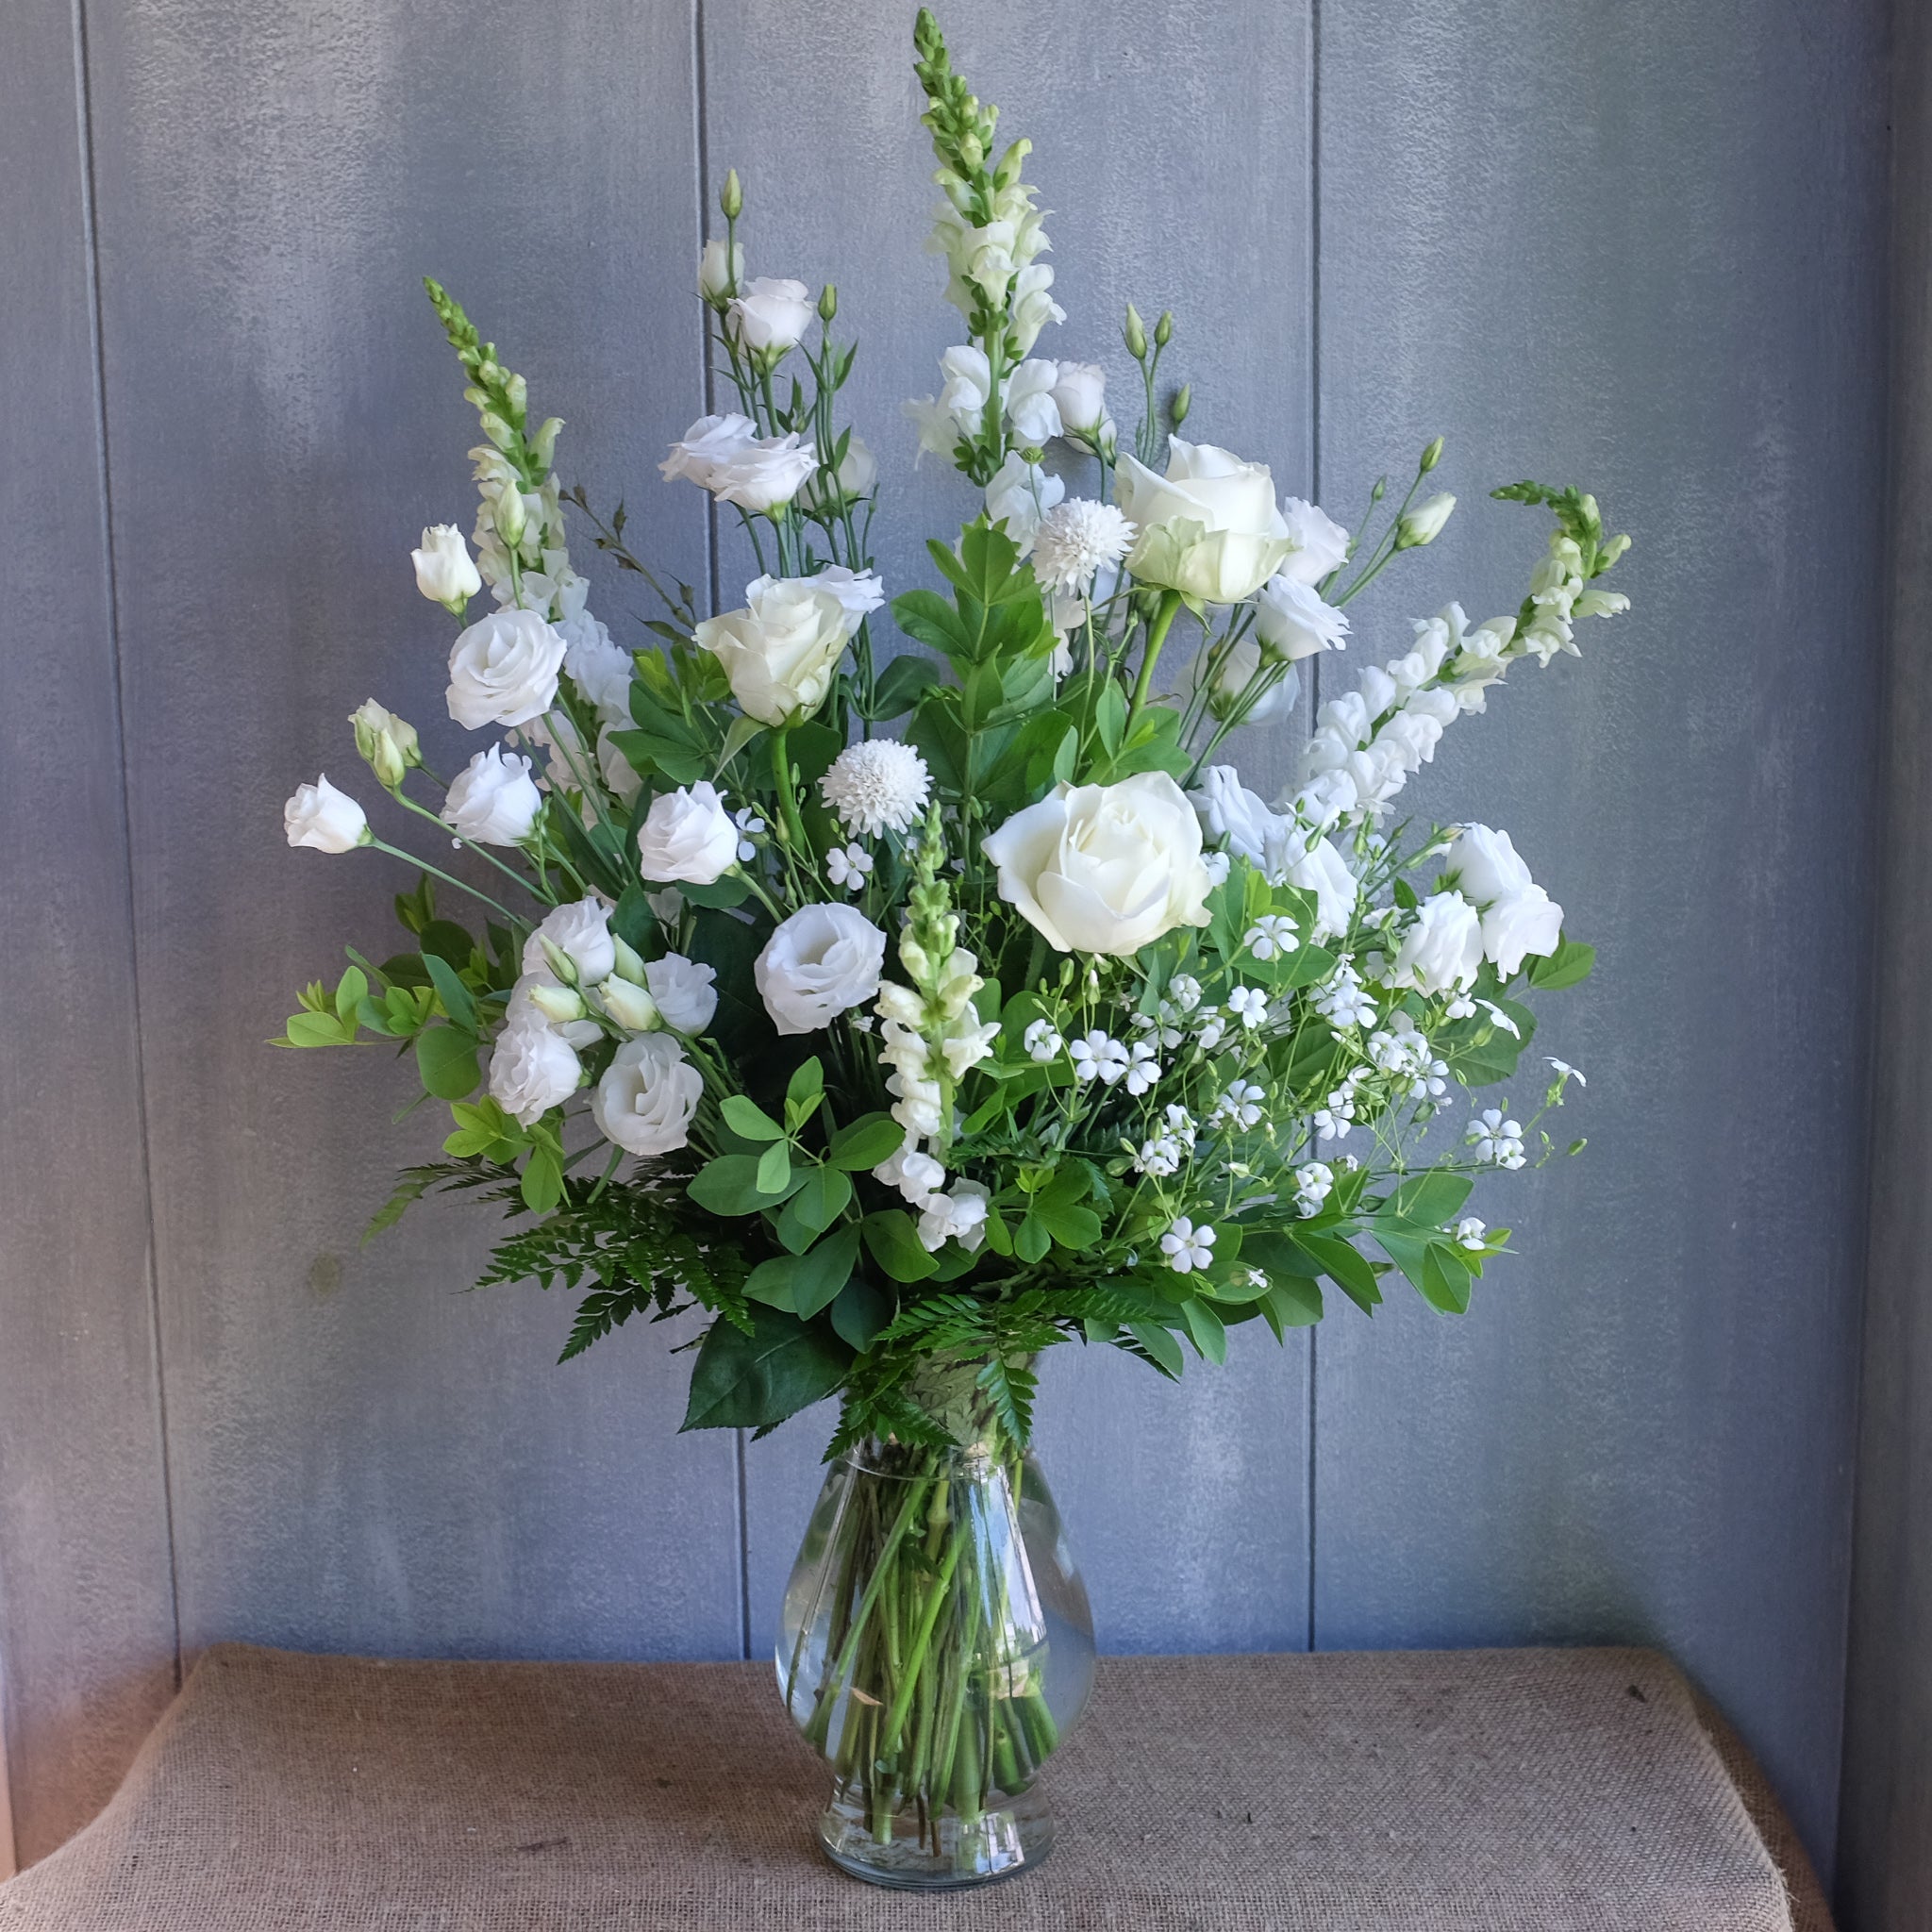 tall and elegant floral arrangement with white roses, ranunculus, and stock by Michler's